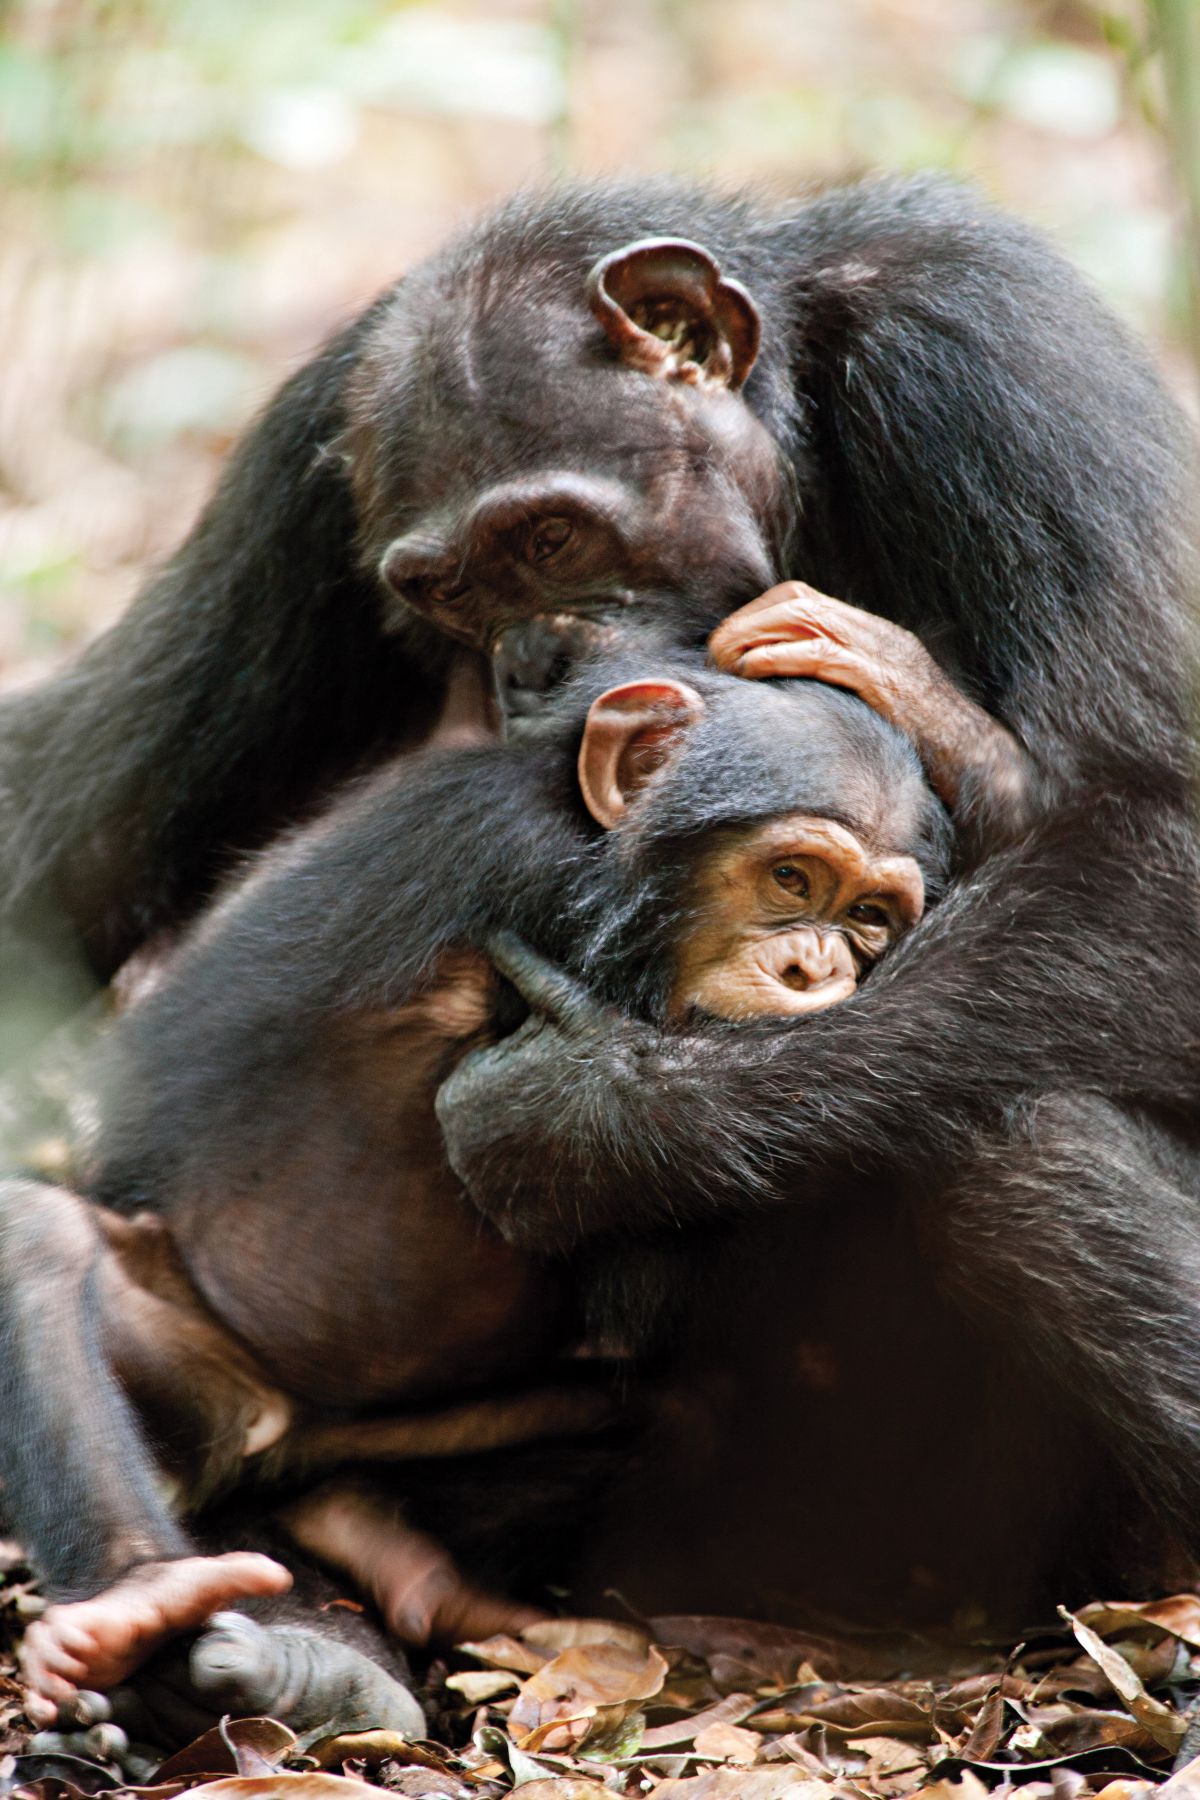 A chimpanzee with its young.